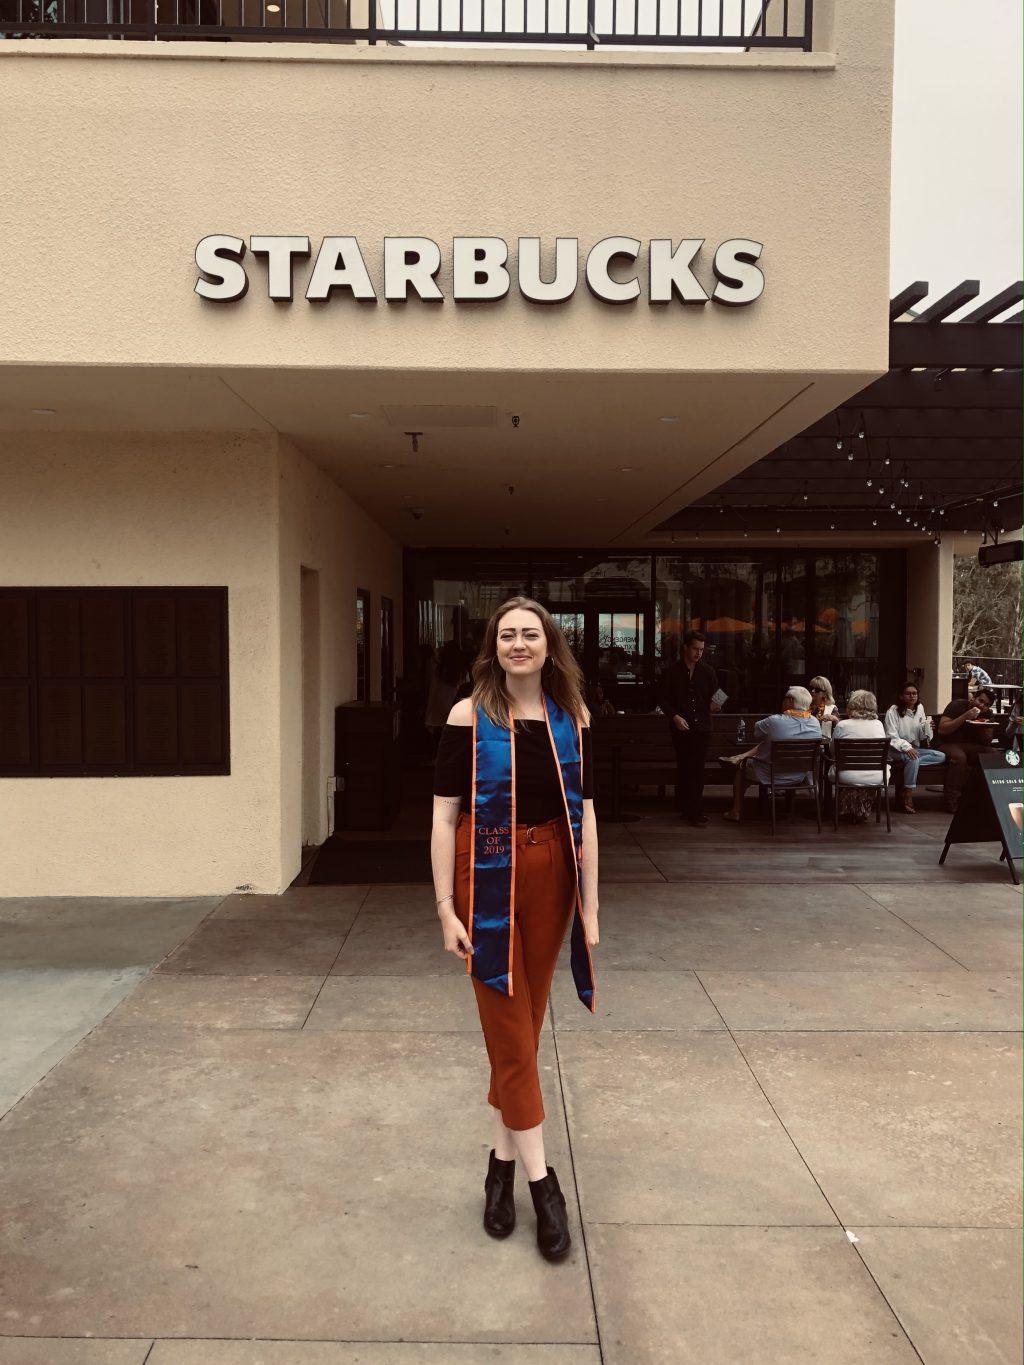 Donlon smiles outside of the Malibu campus Starbucks at the end of her final semester at Pepperdine in spring 2019. Donlon said she thinks it is funny that so much of her life involves coffee, between her work with Coffee Monday and her job as a Starbucks barista.